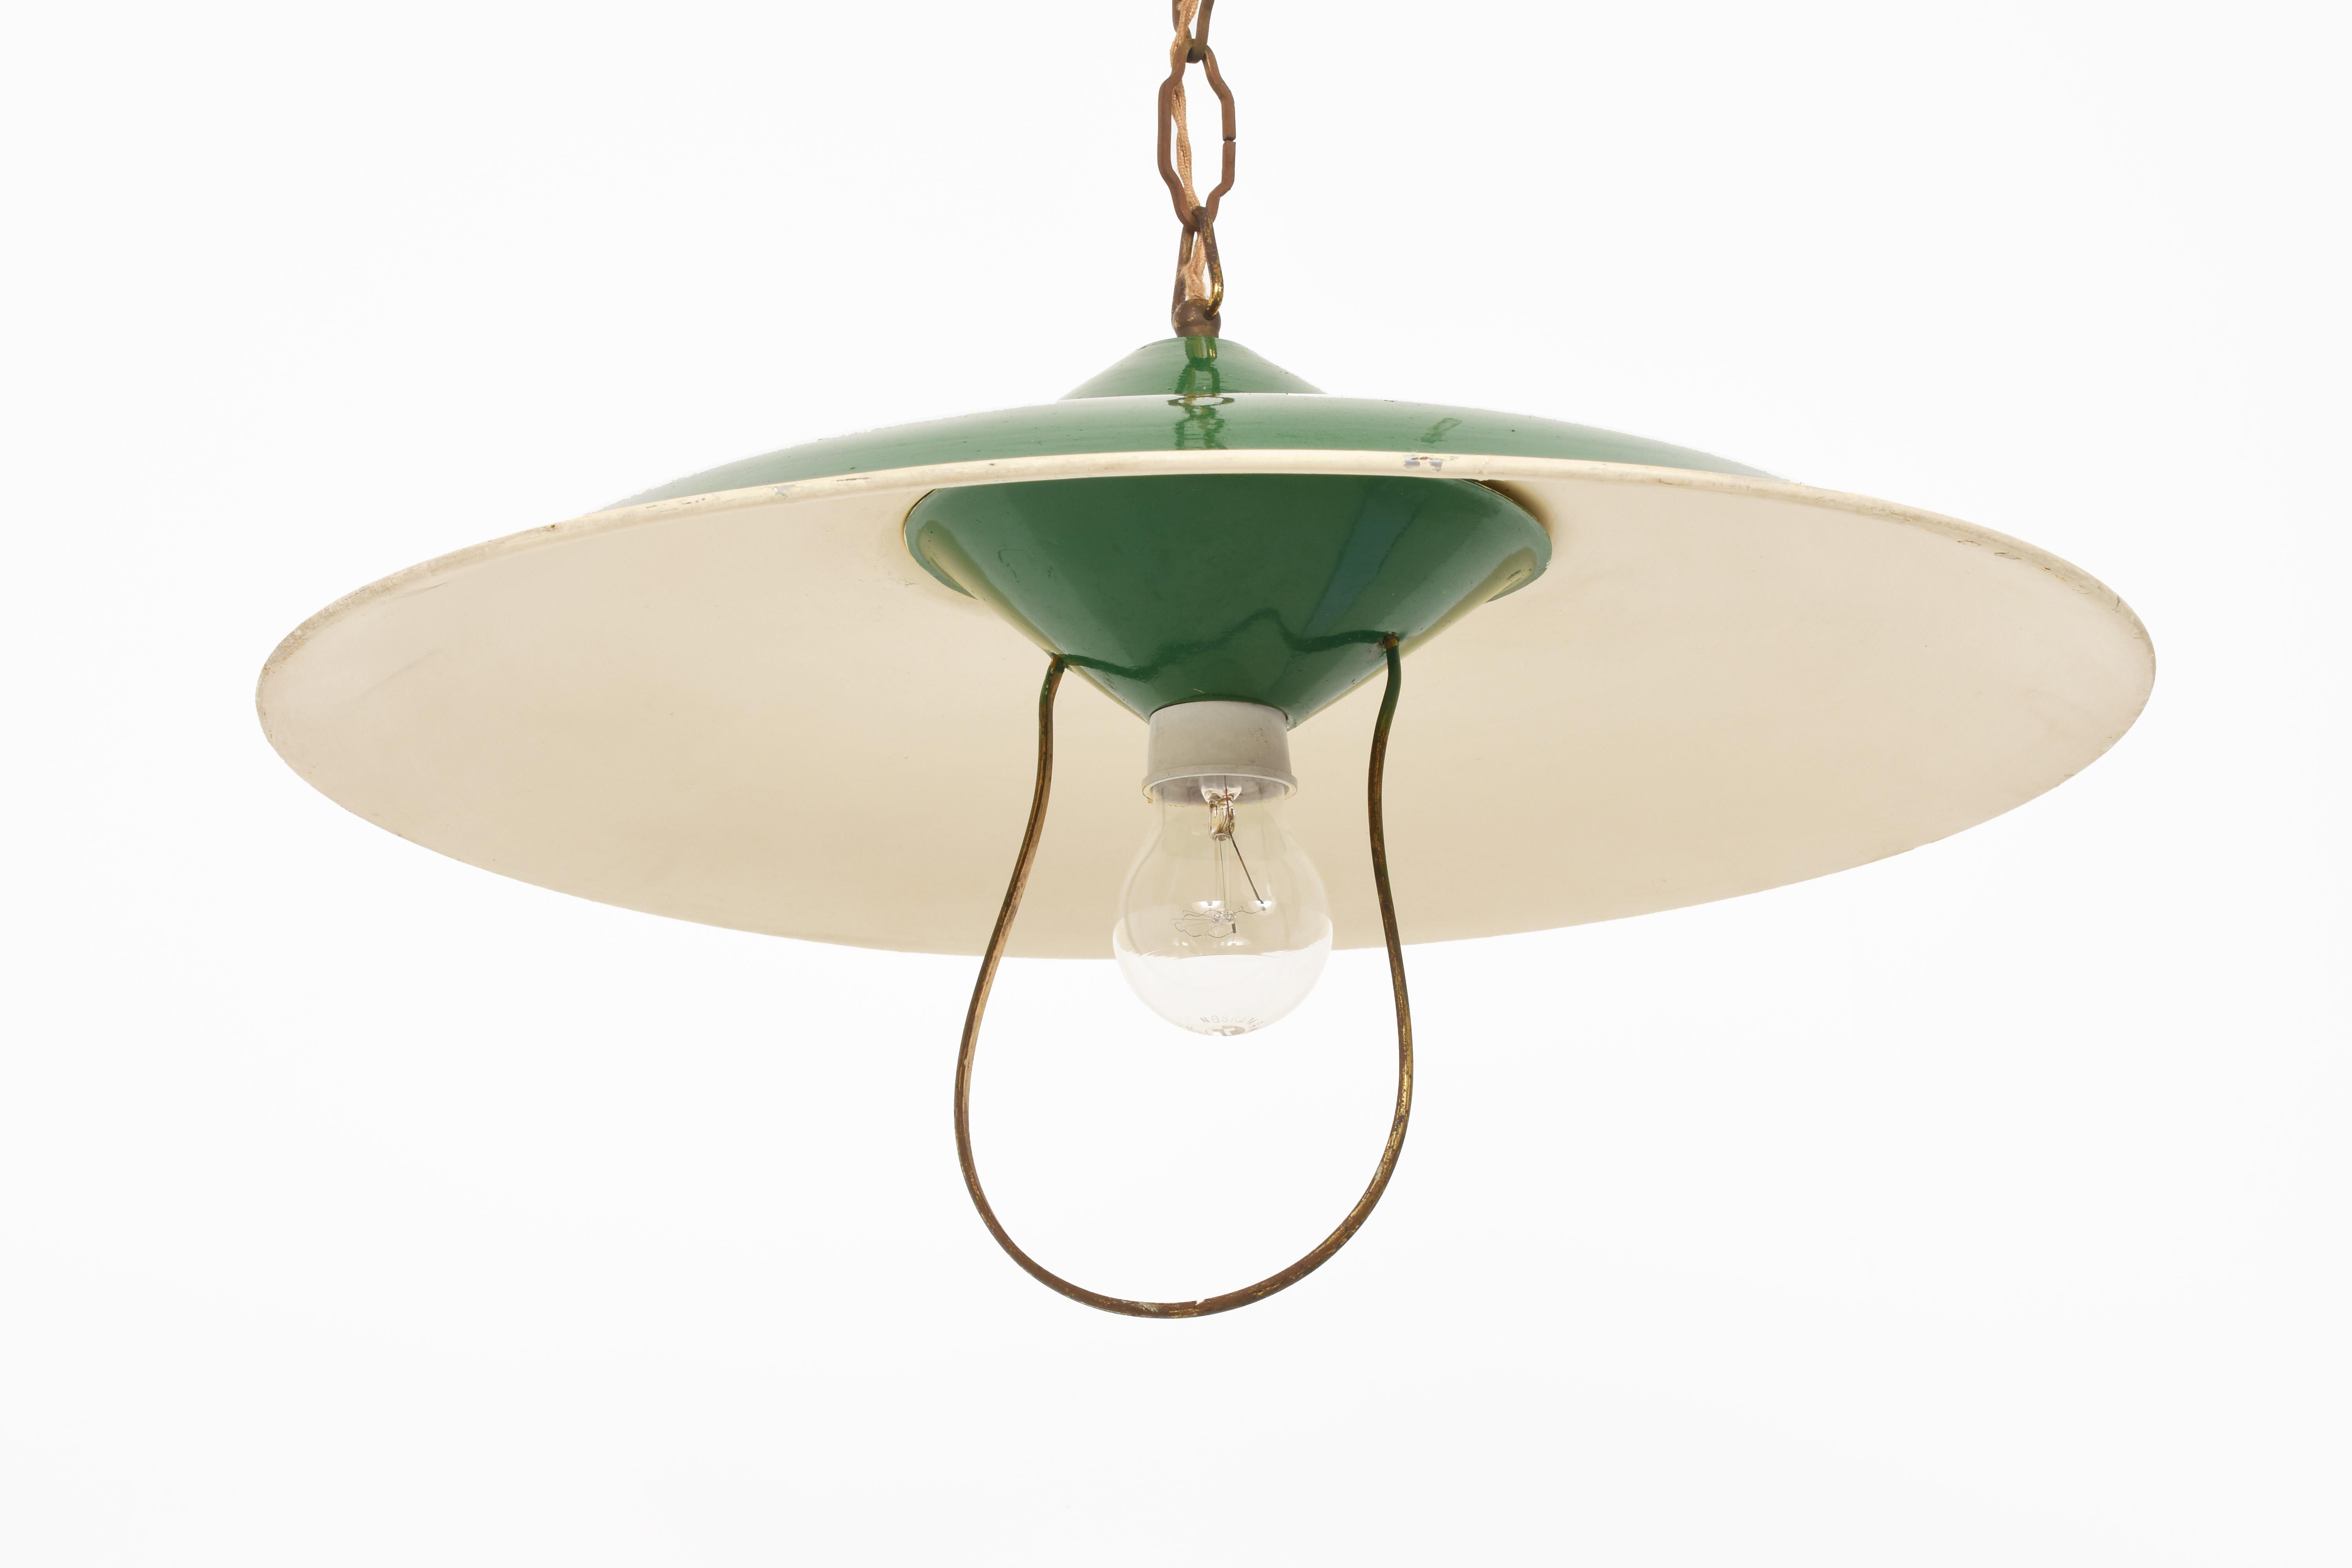 Italian Chandelier in Green Glazed Metal Pendant Italy, Industrial Style of the 1950s For Sale